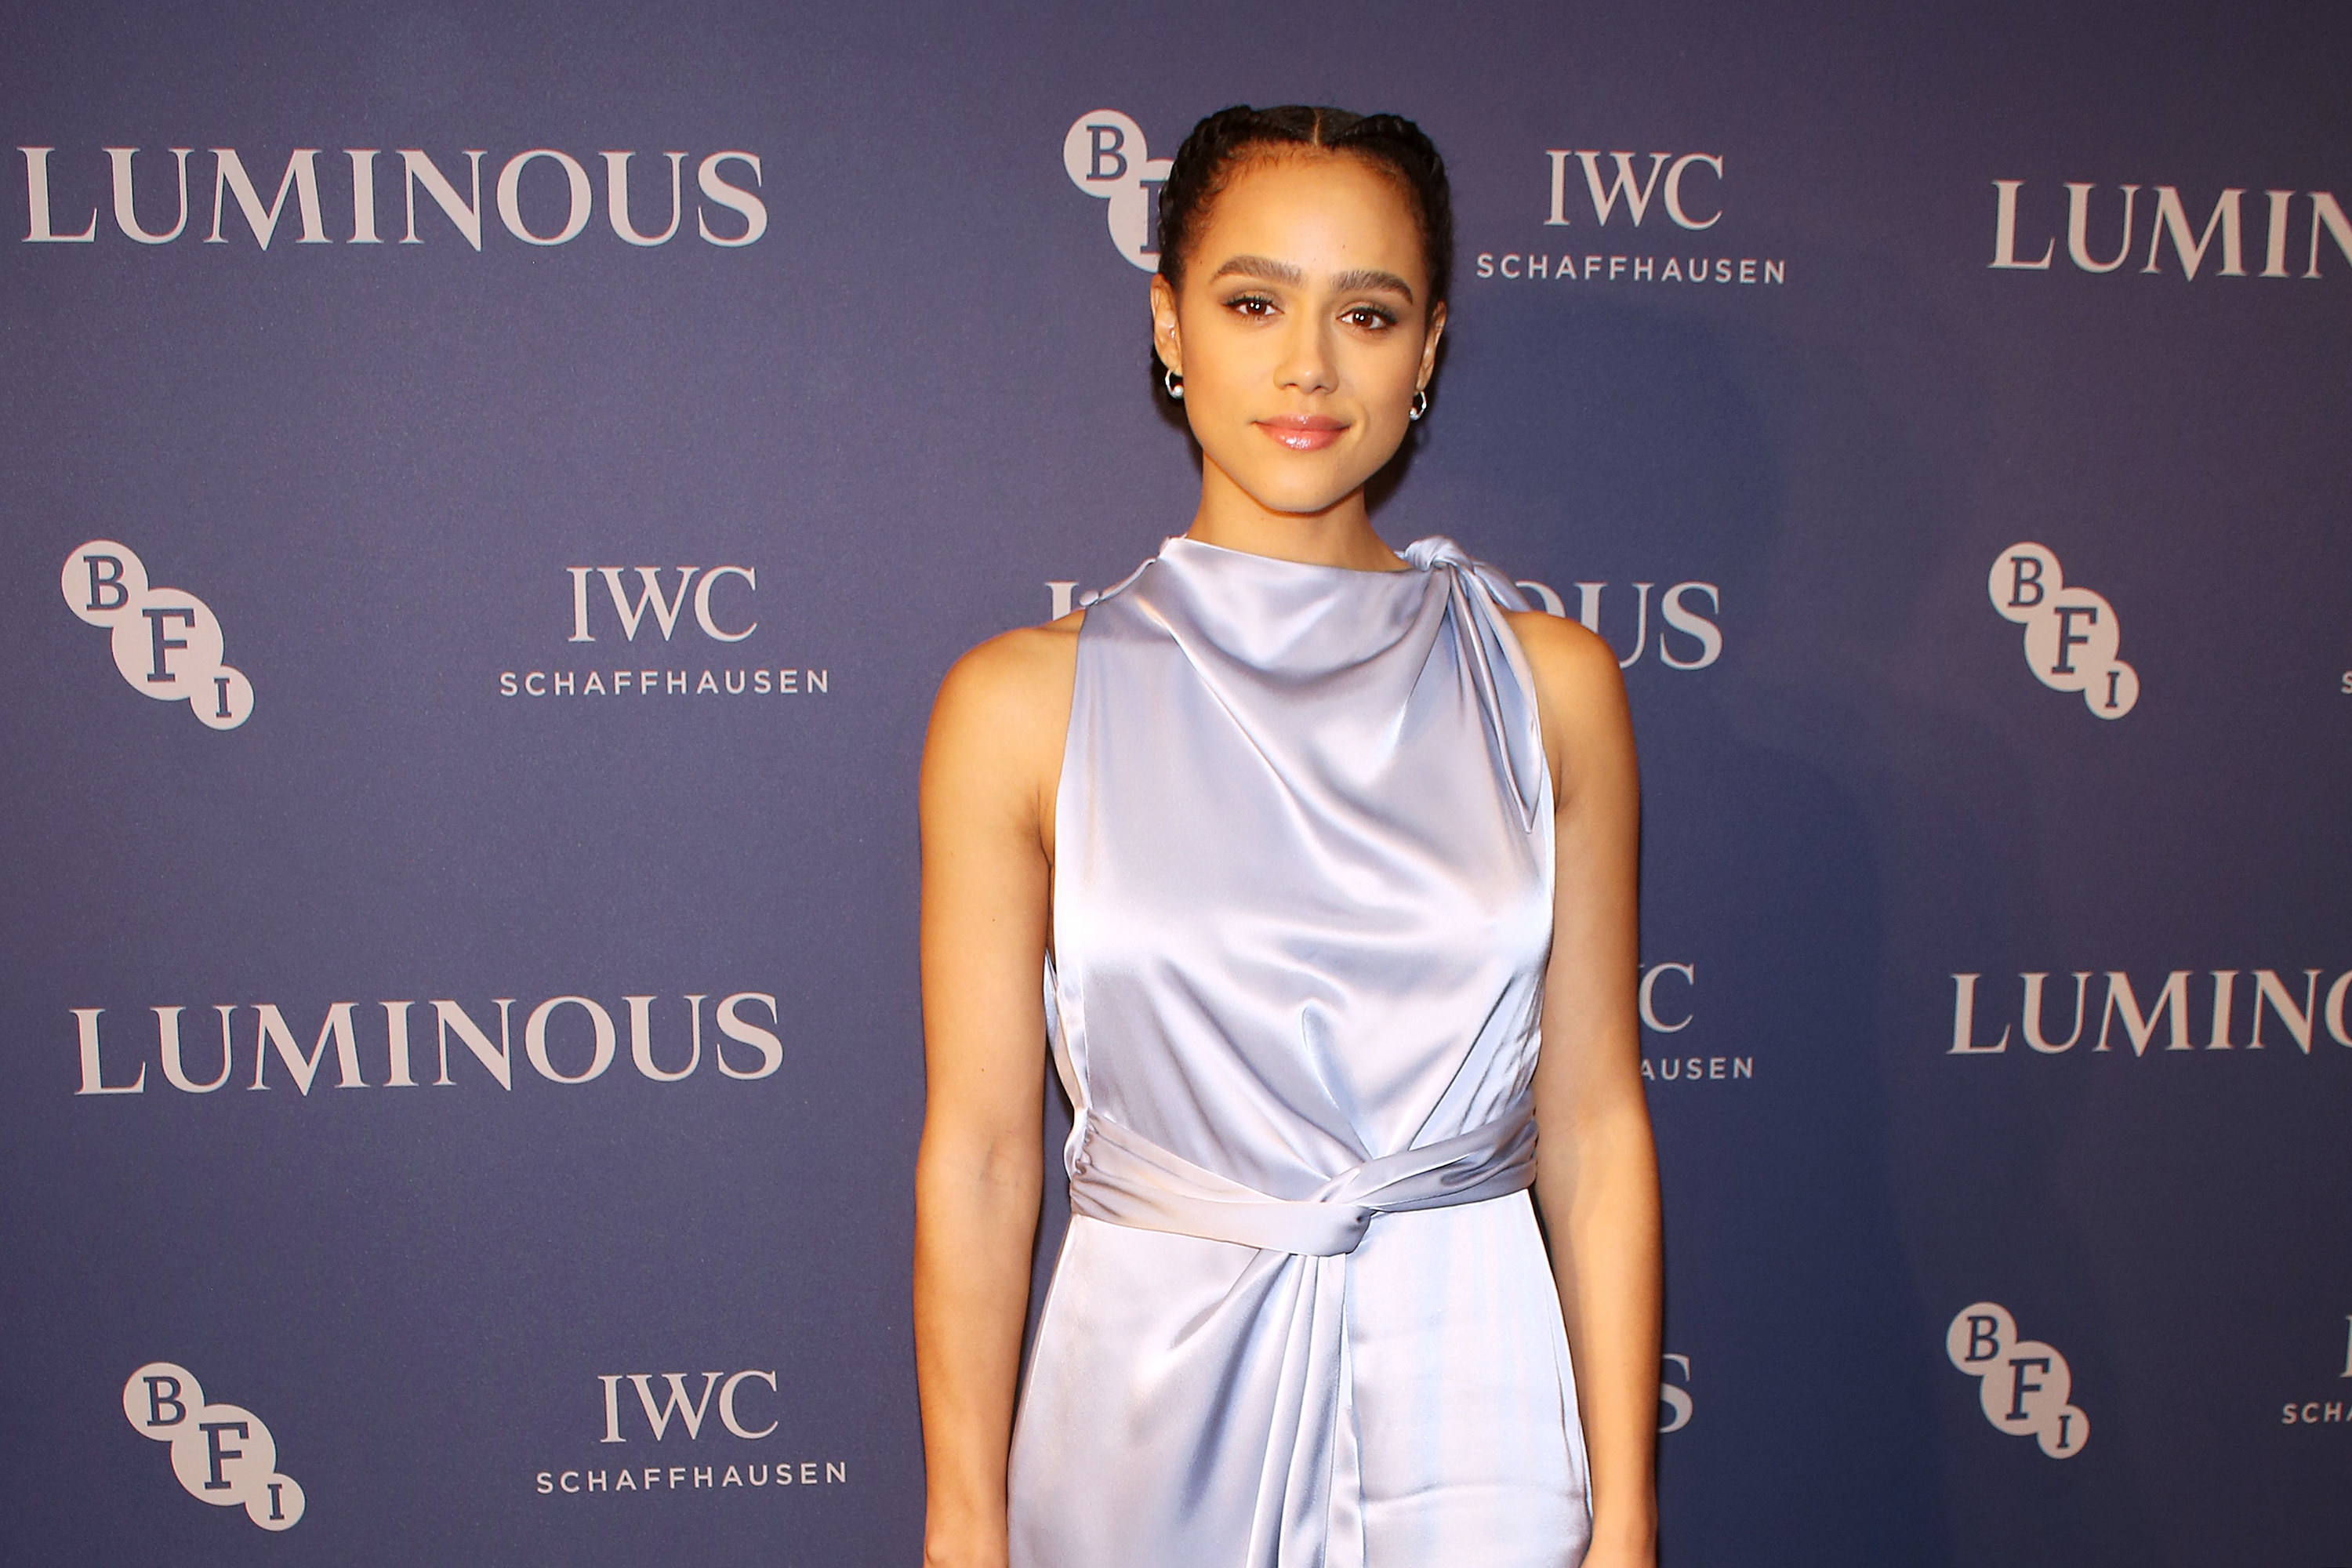 Nathalie Emmanuel attends the BFI &amp; IWC Luminous Gala at The Roundhouse on October 1, 2019, in London, England